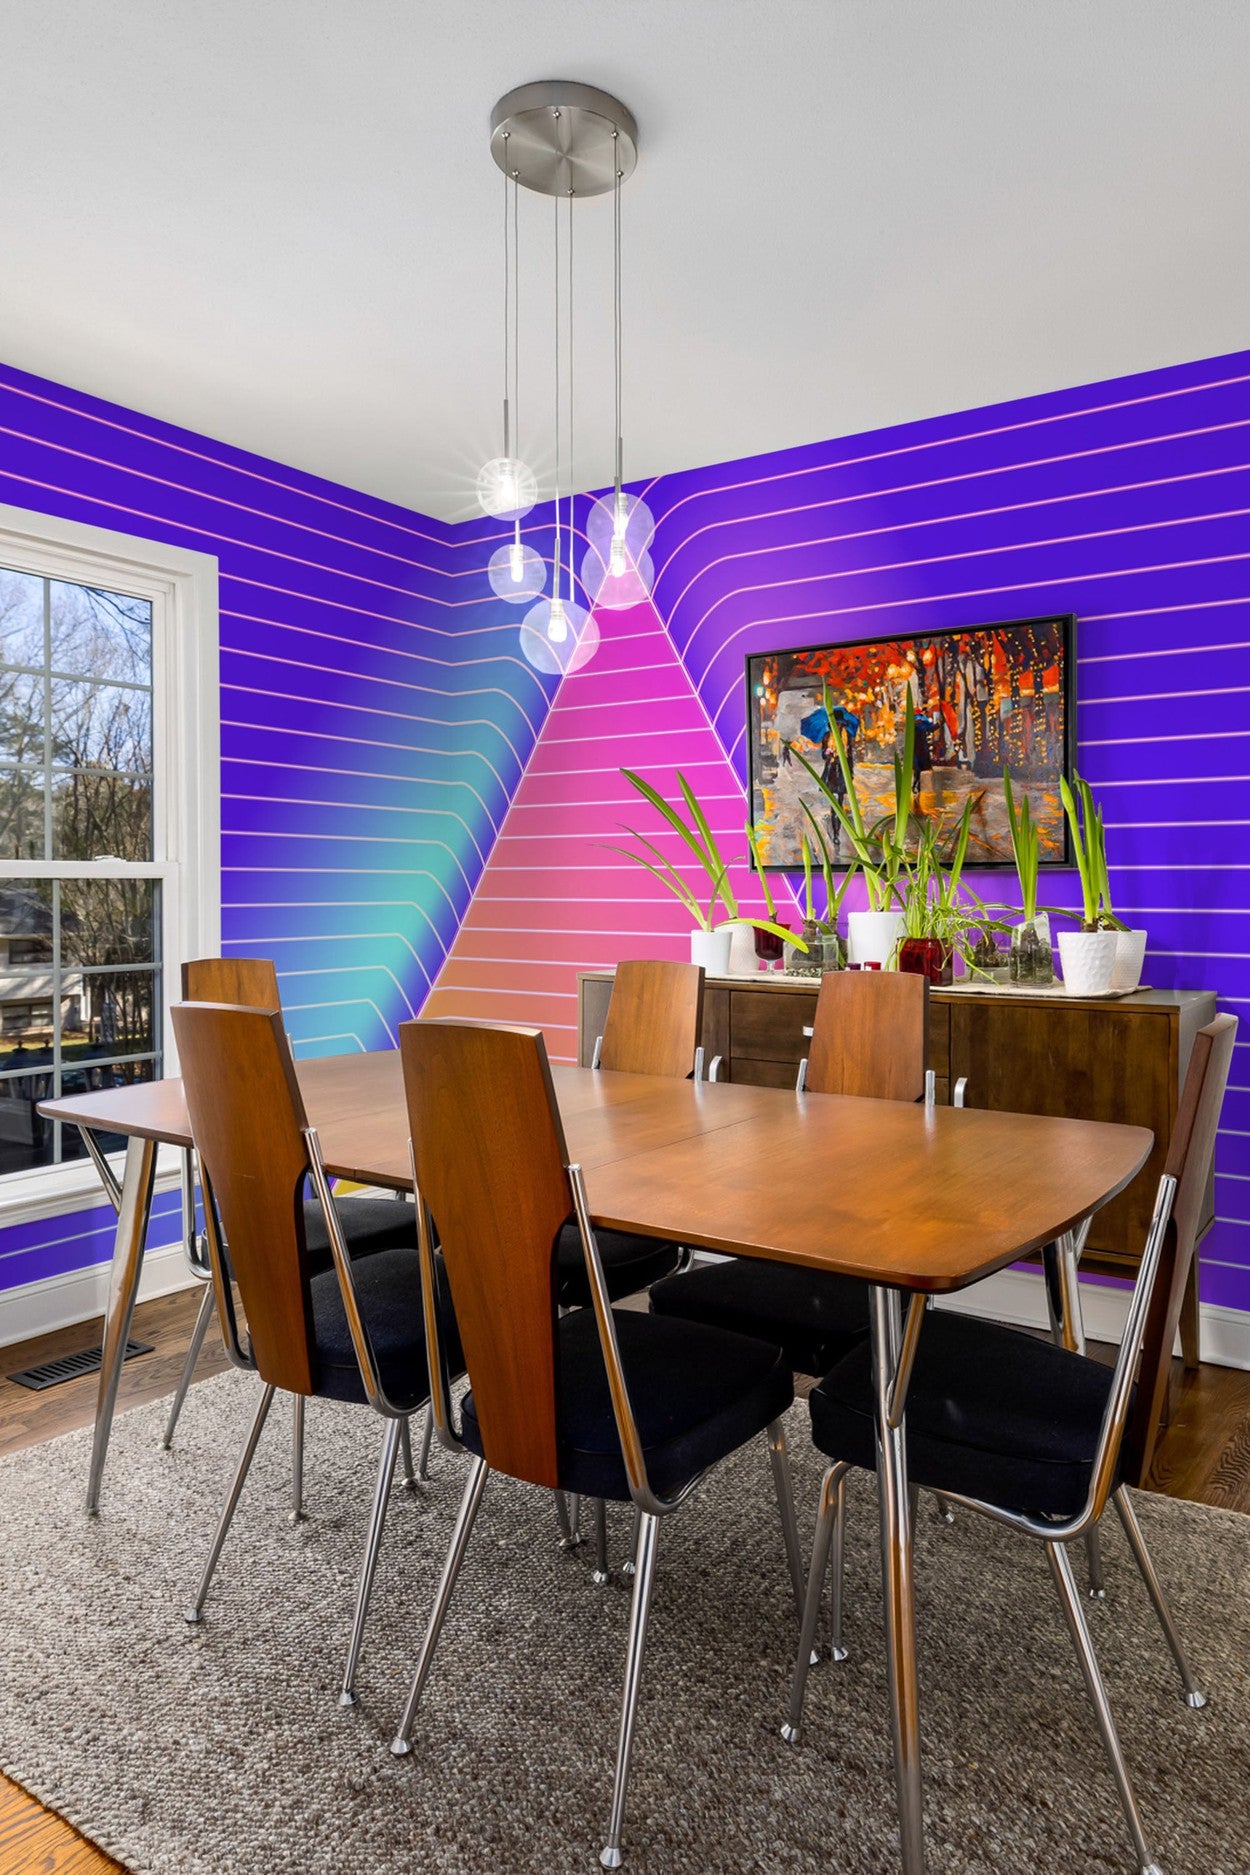 A contemporary dining room with bold purple striped walls and a vibrant wall mural above a wooden table with chairs